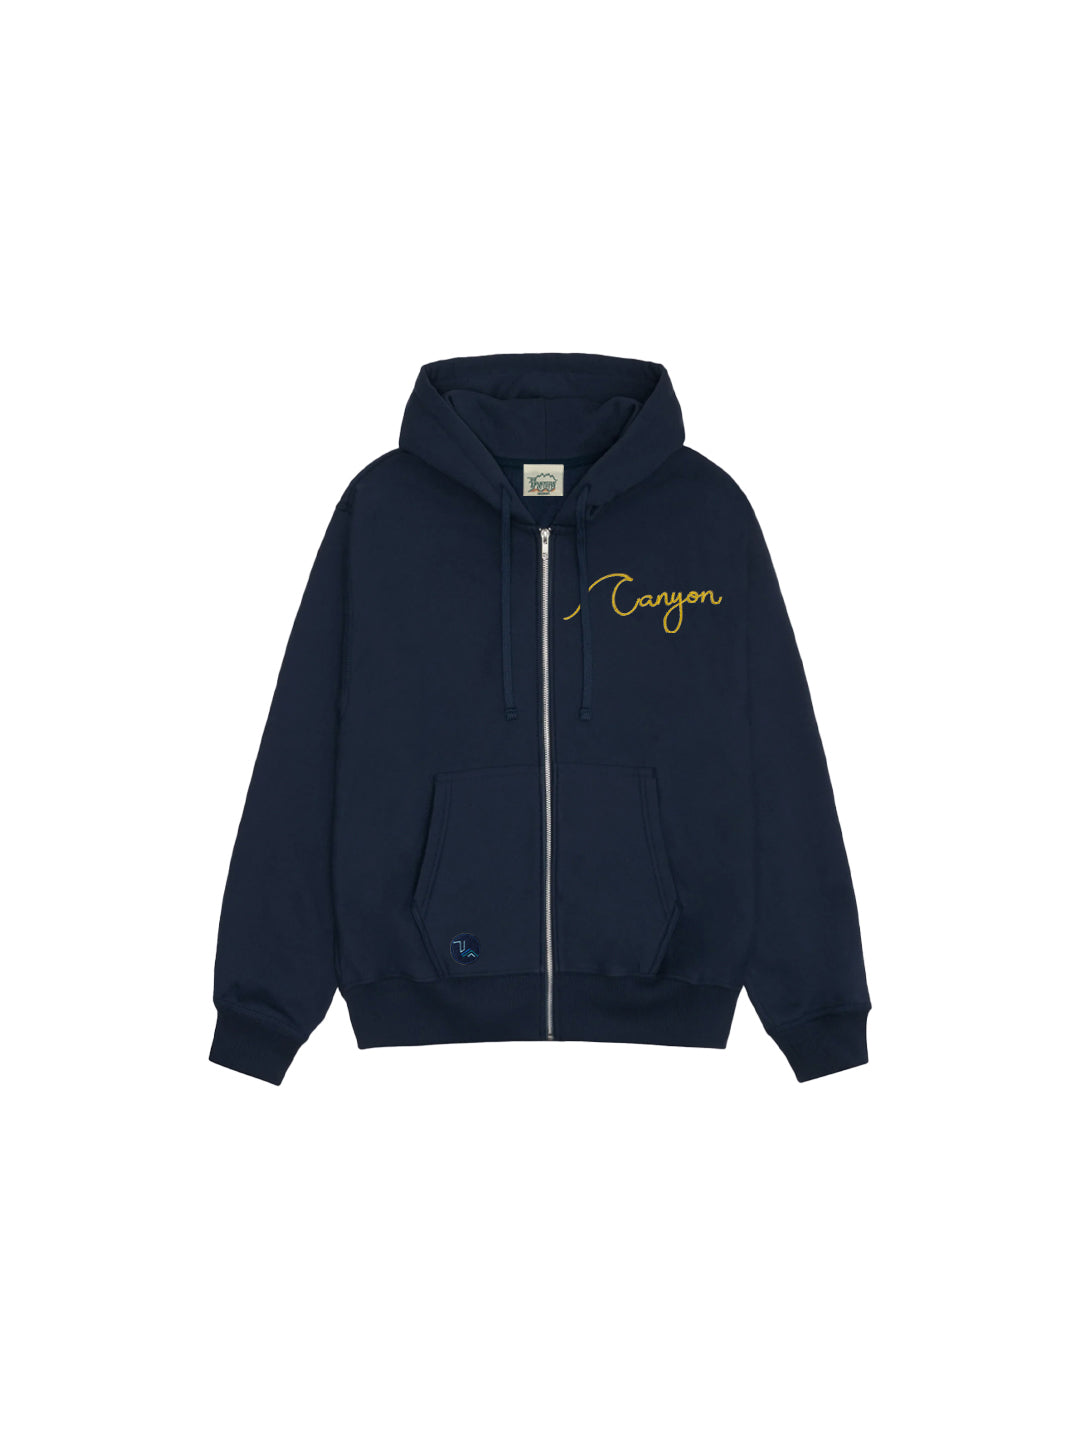 Canyon Wave Youth Hoodie in Navy